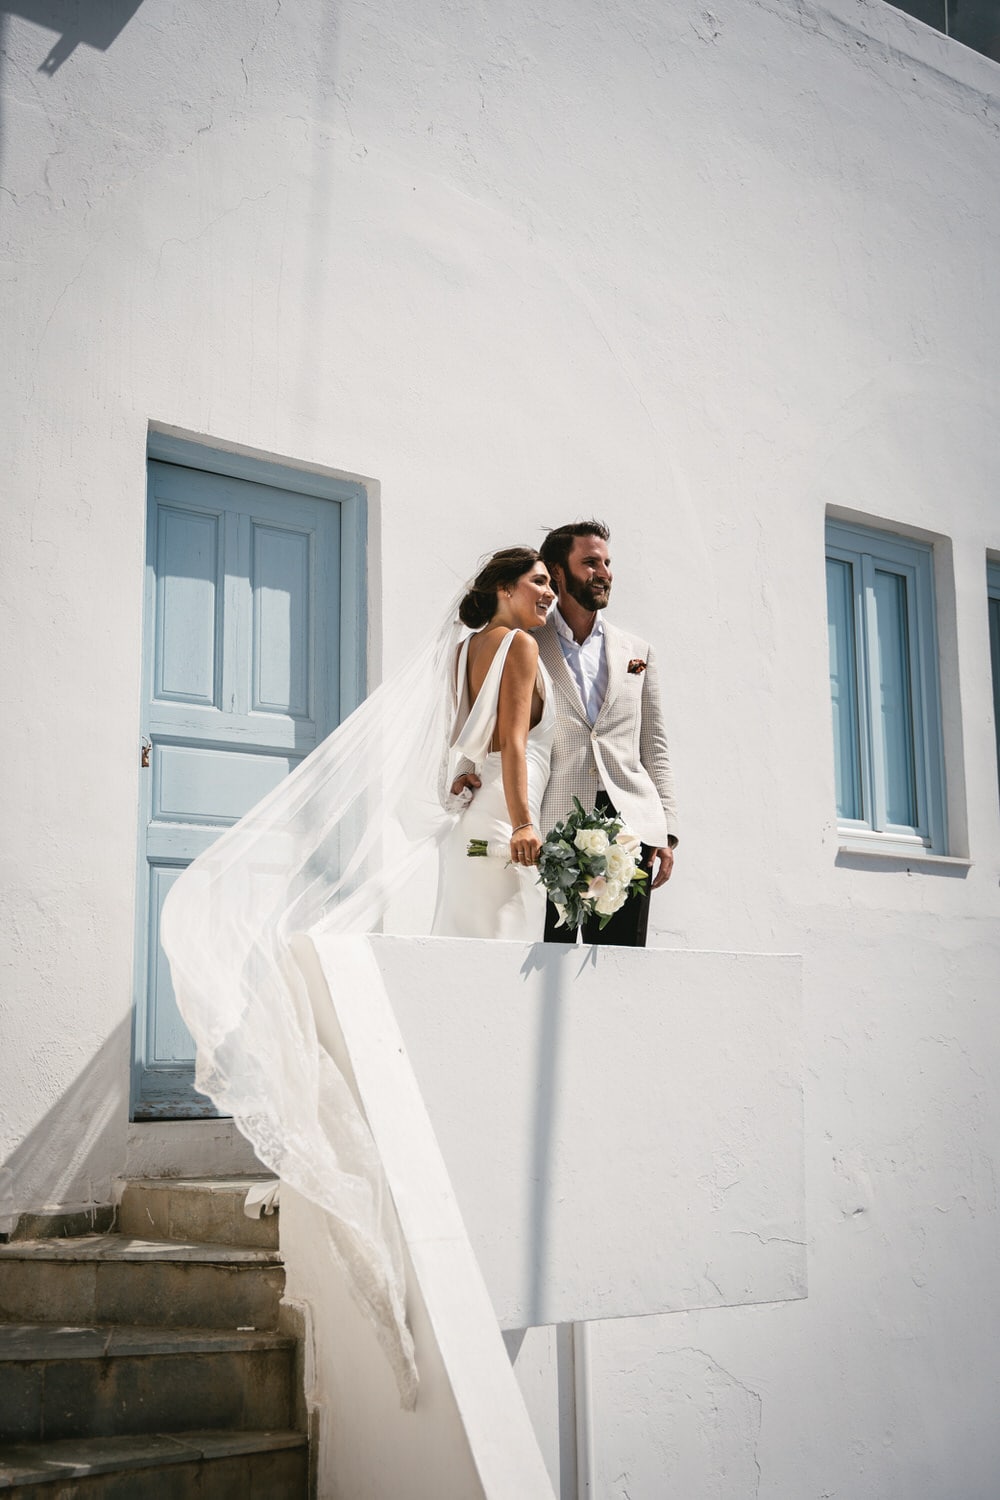 When to elope in Greece